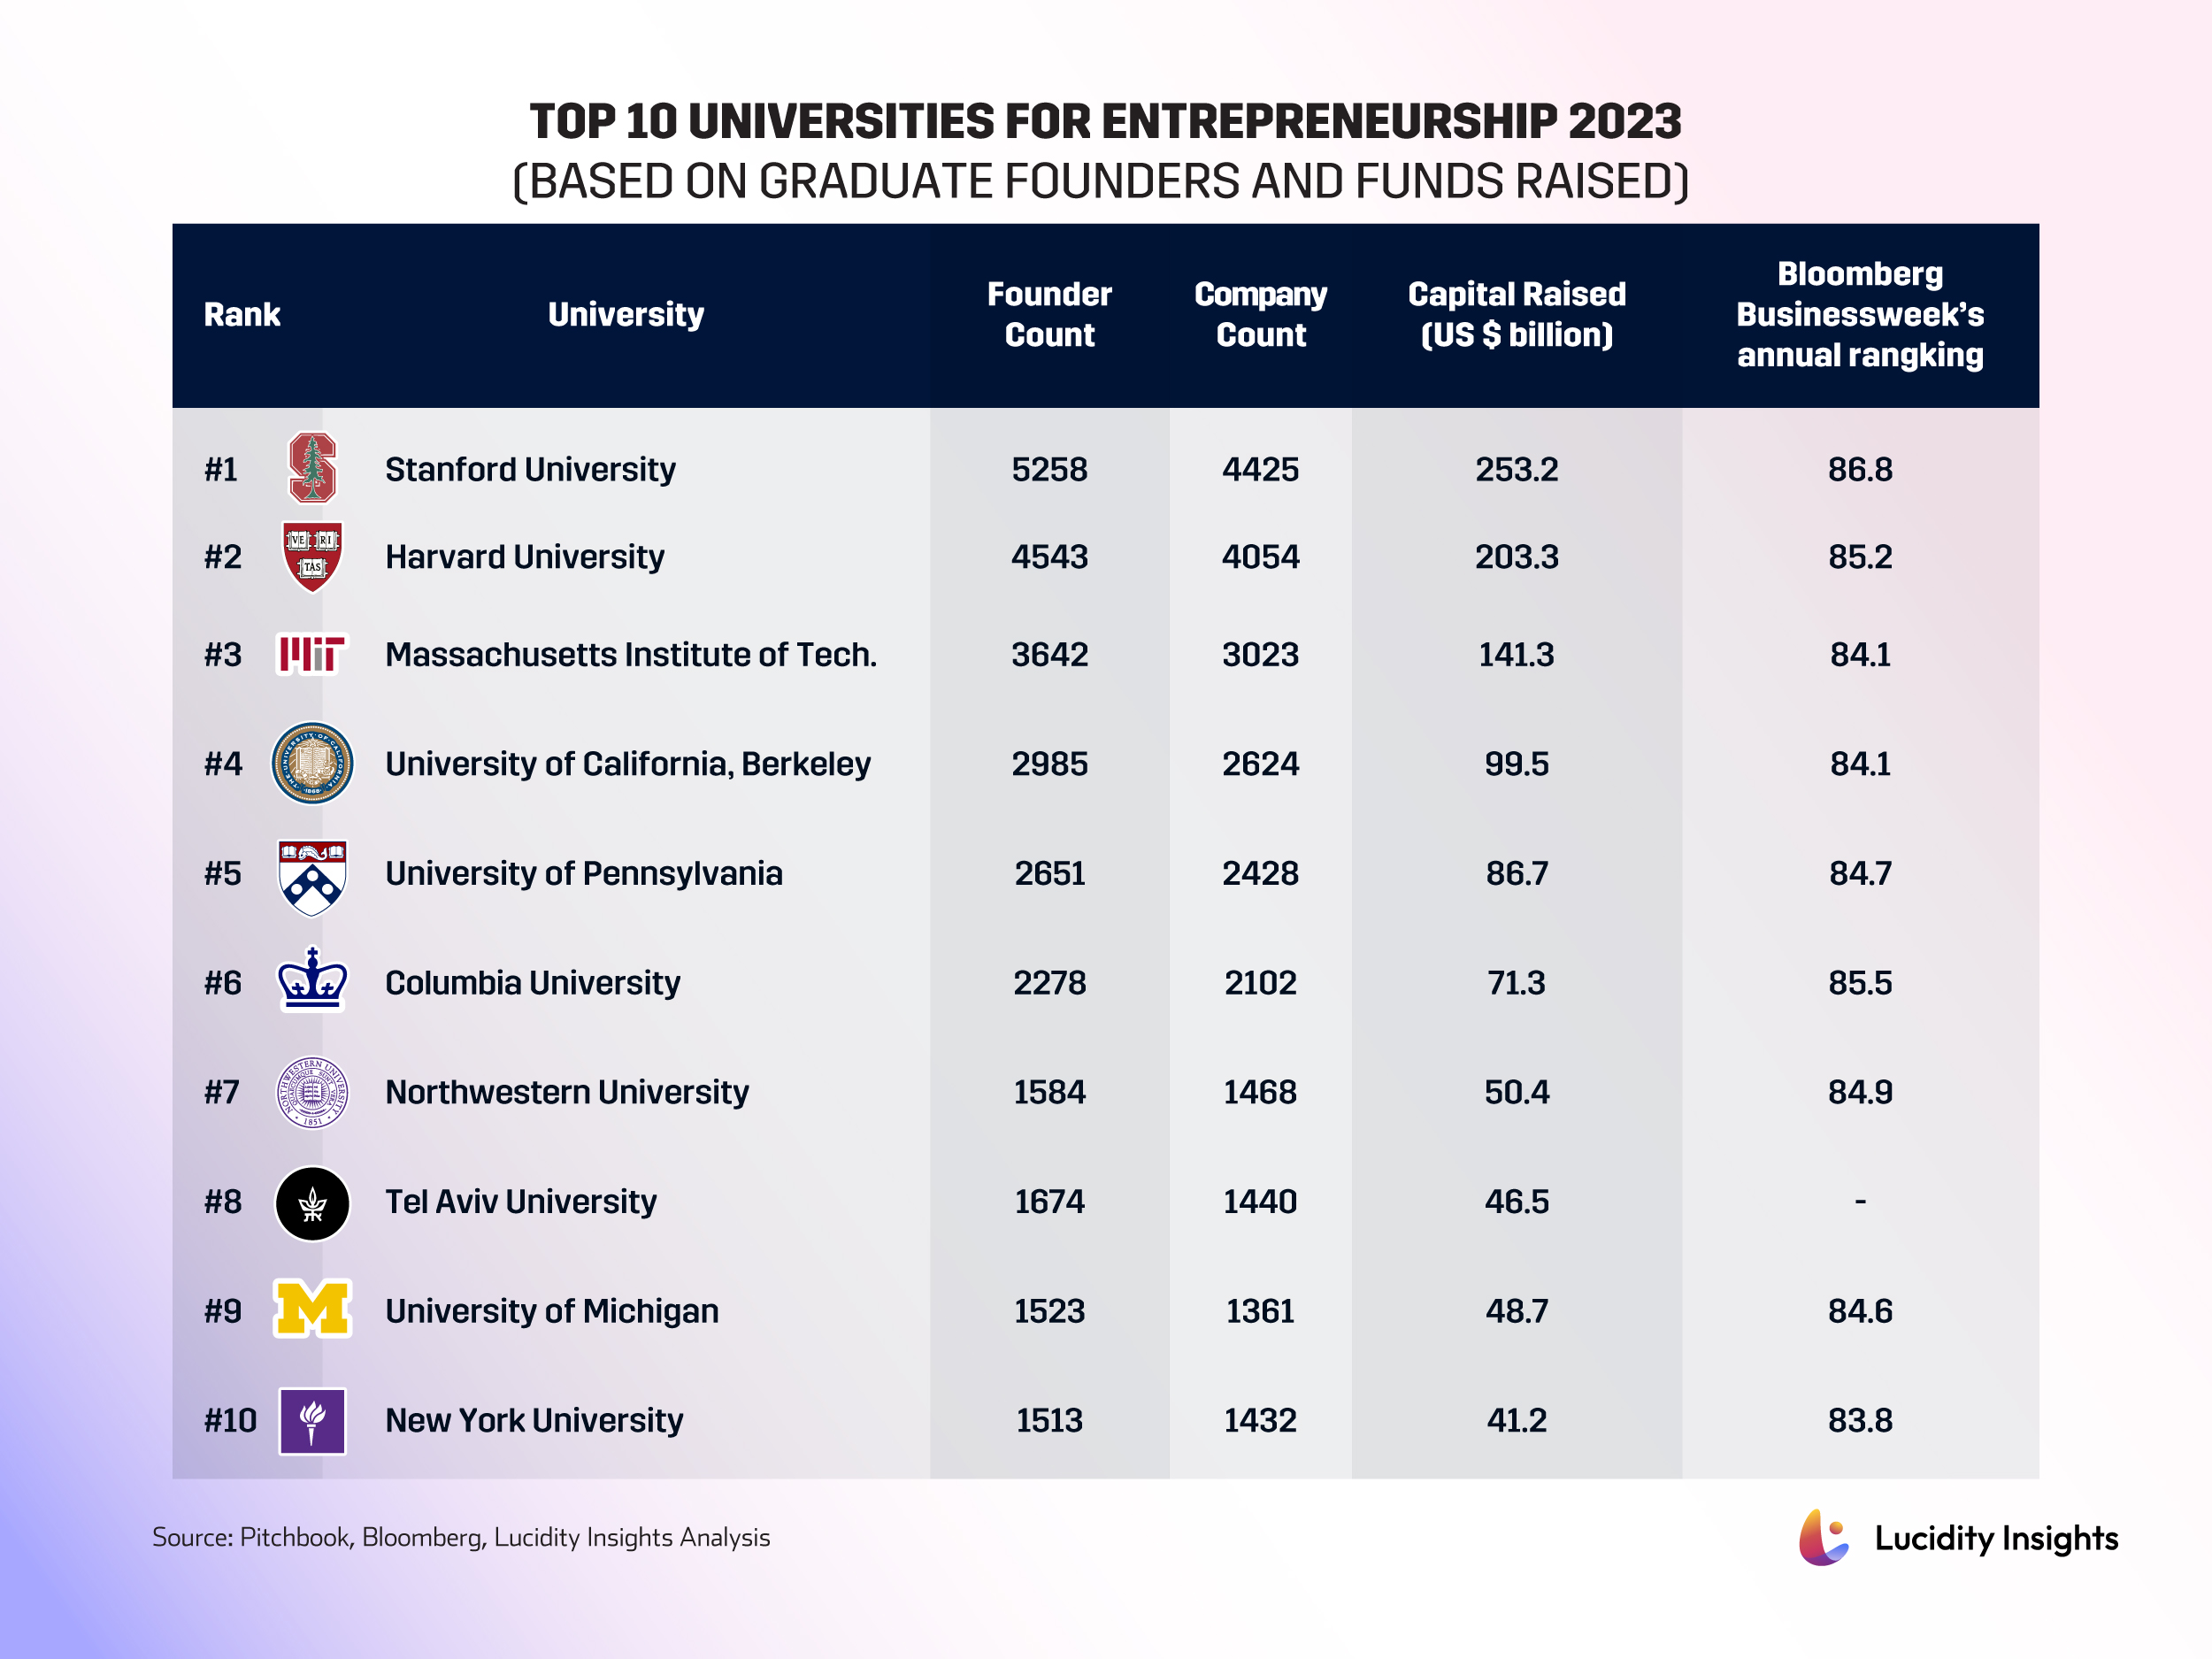 Top 10 Universities for Entrepreneurship 2023 (based on graduate founders and funds raised)